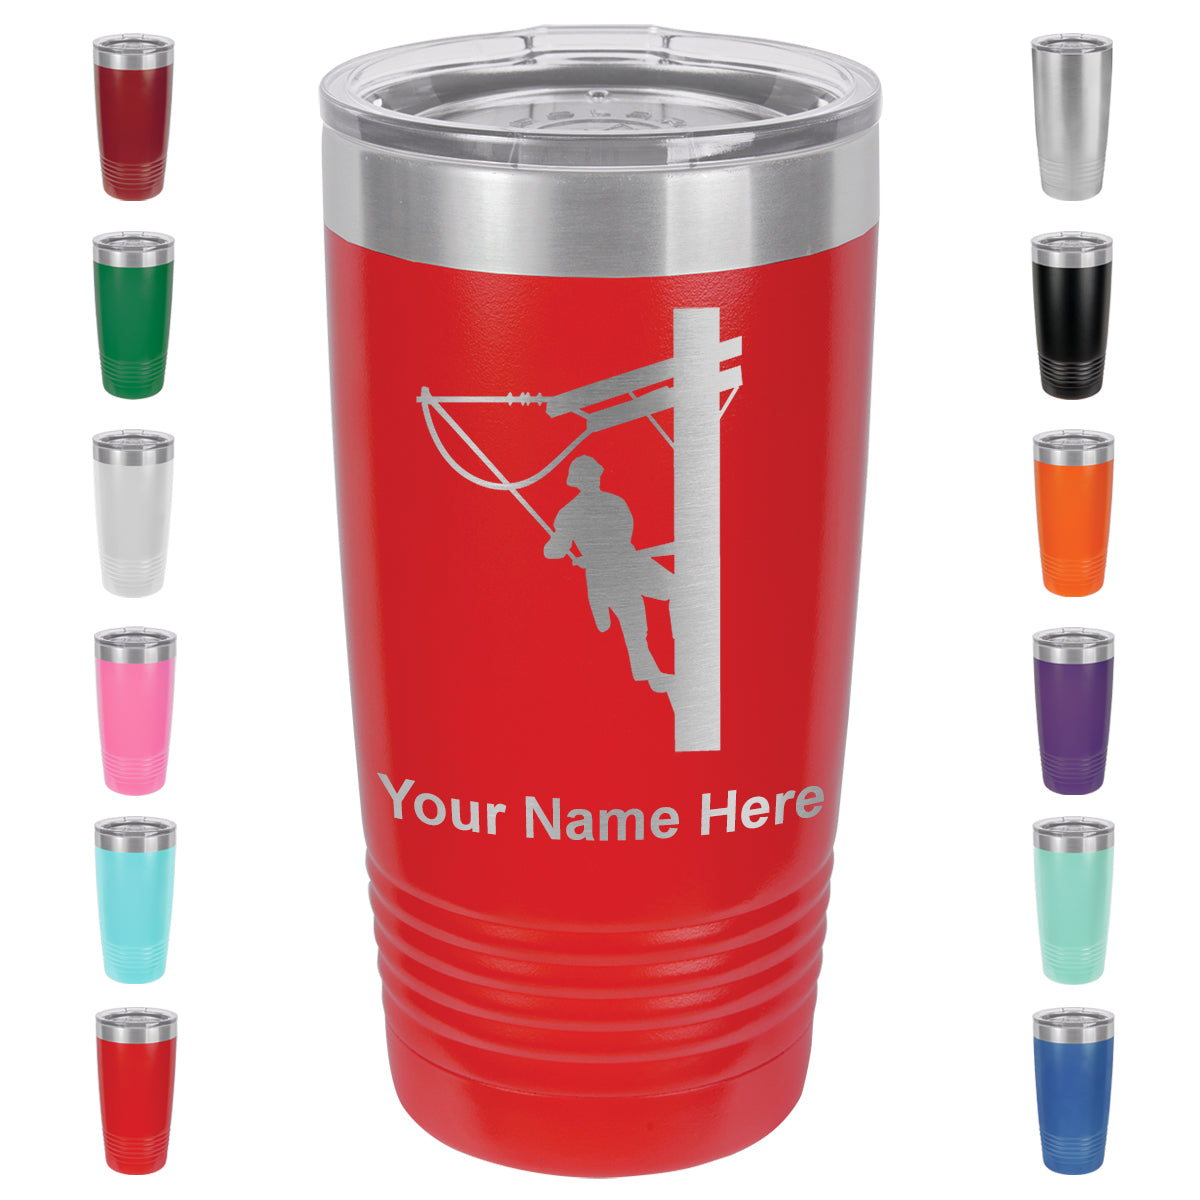 20oz Vacuum Insulated Tumbler Mug, Lineman, Personalized Engraving Included